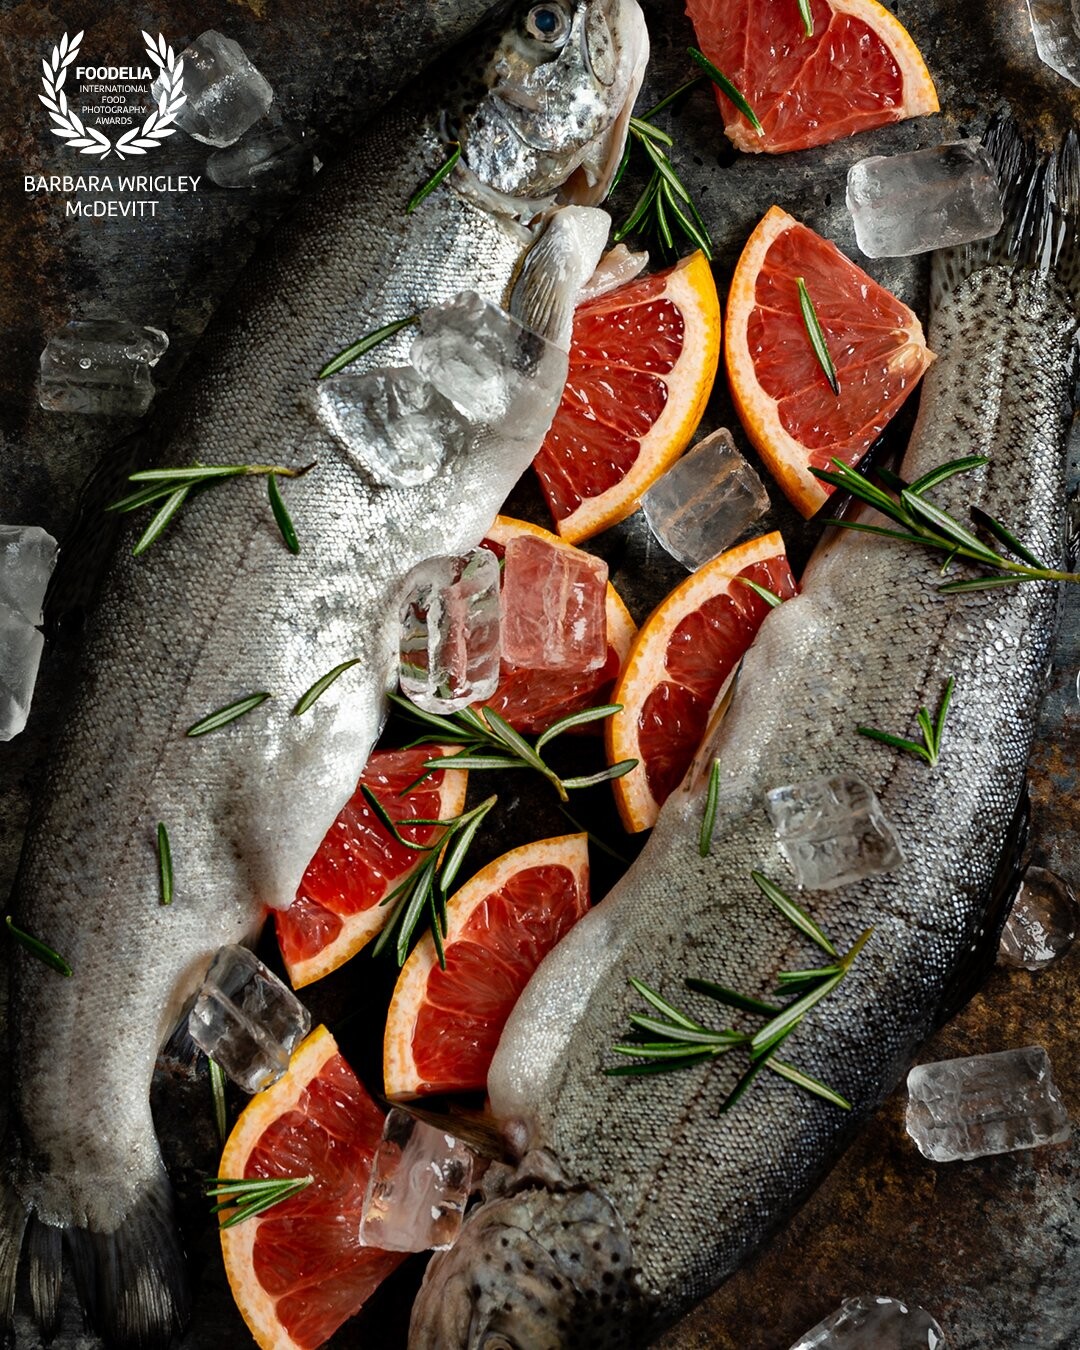 Ruby red grapefruit pairs nicely with sprigs of rosemary and adds a tart citrusy flavor to a pair of branzino.  Shot with a Nikon D850 and Profoto B1.